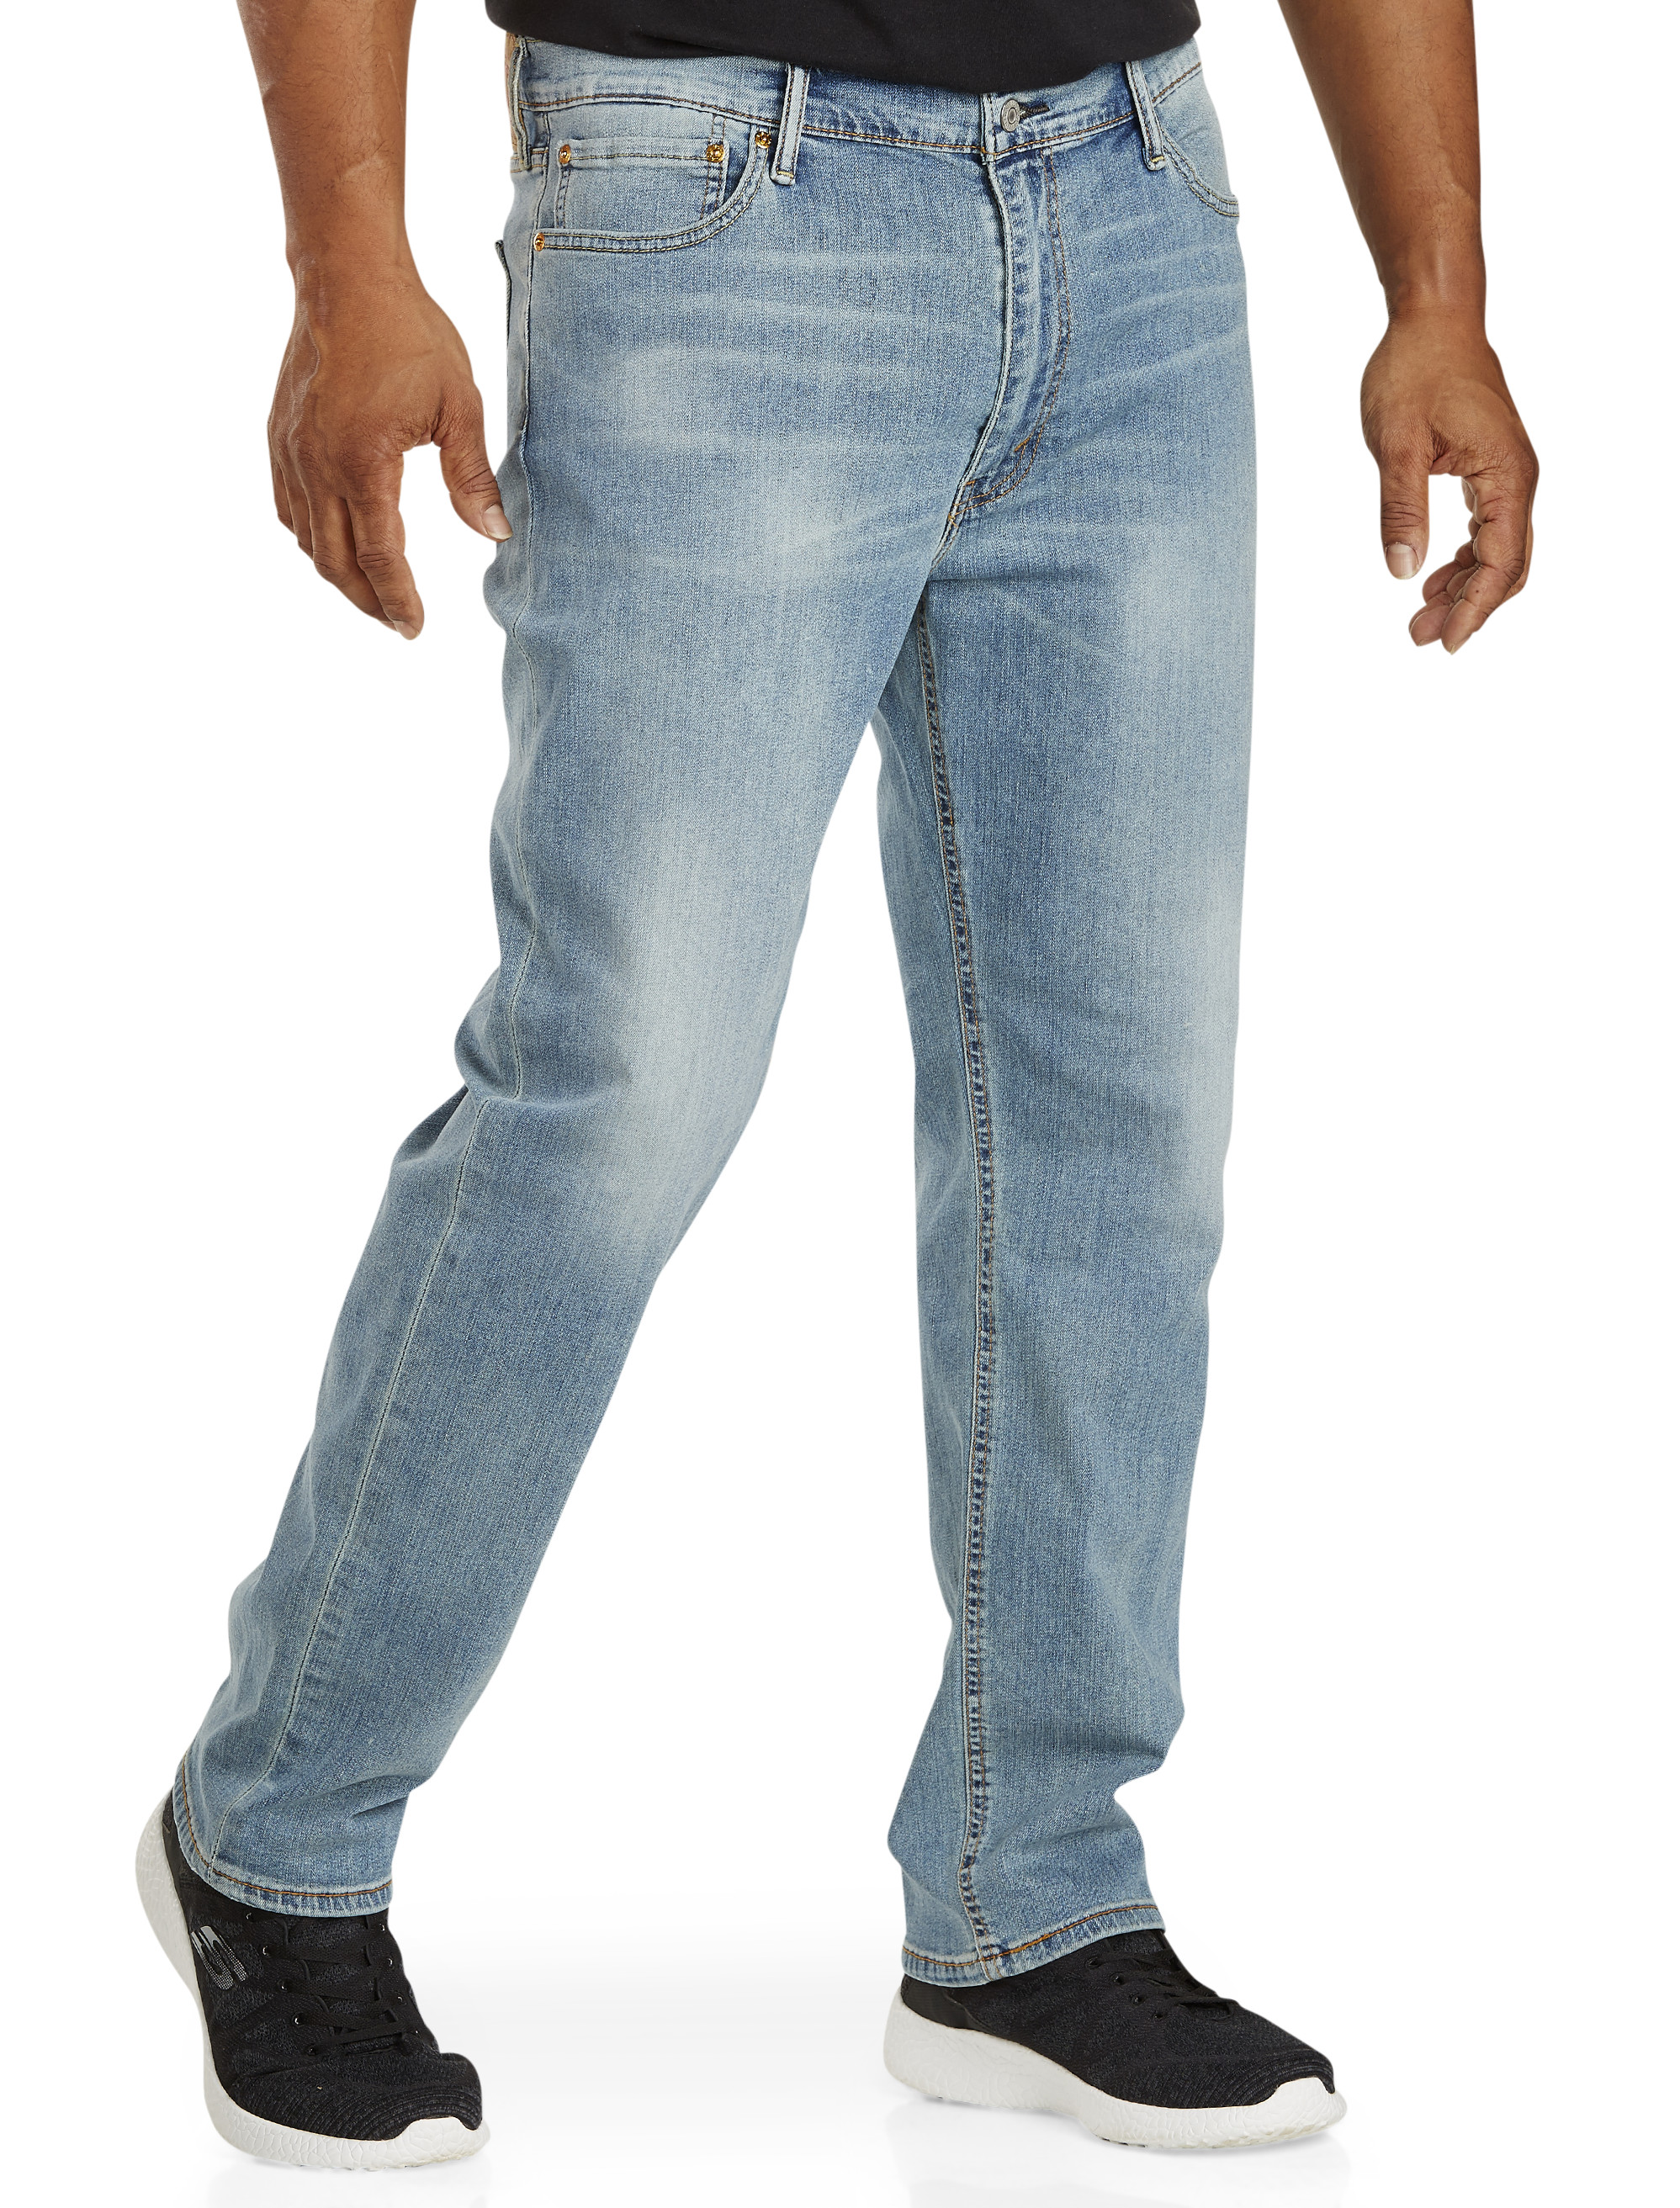 541 Athletic-Fit Stretch Jeans